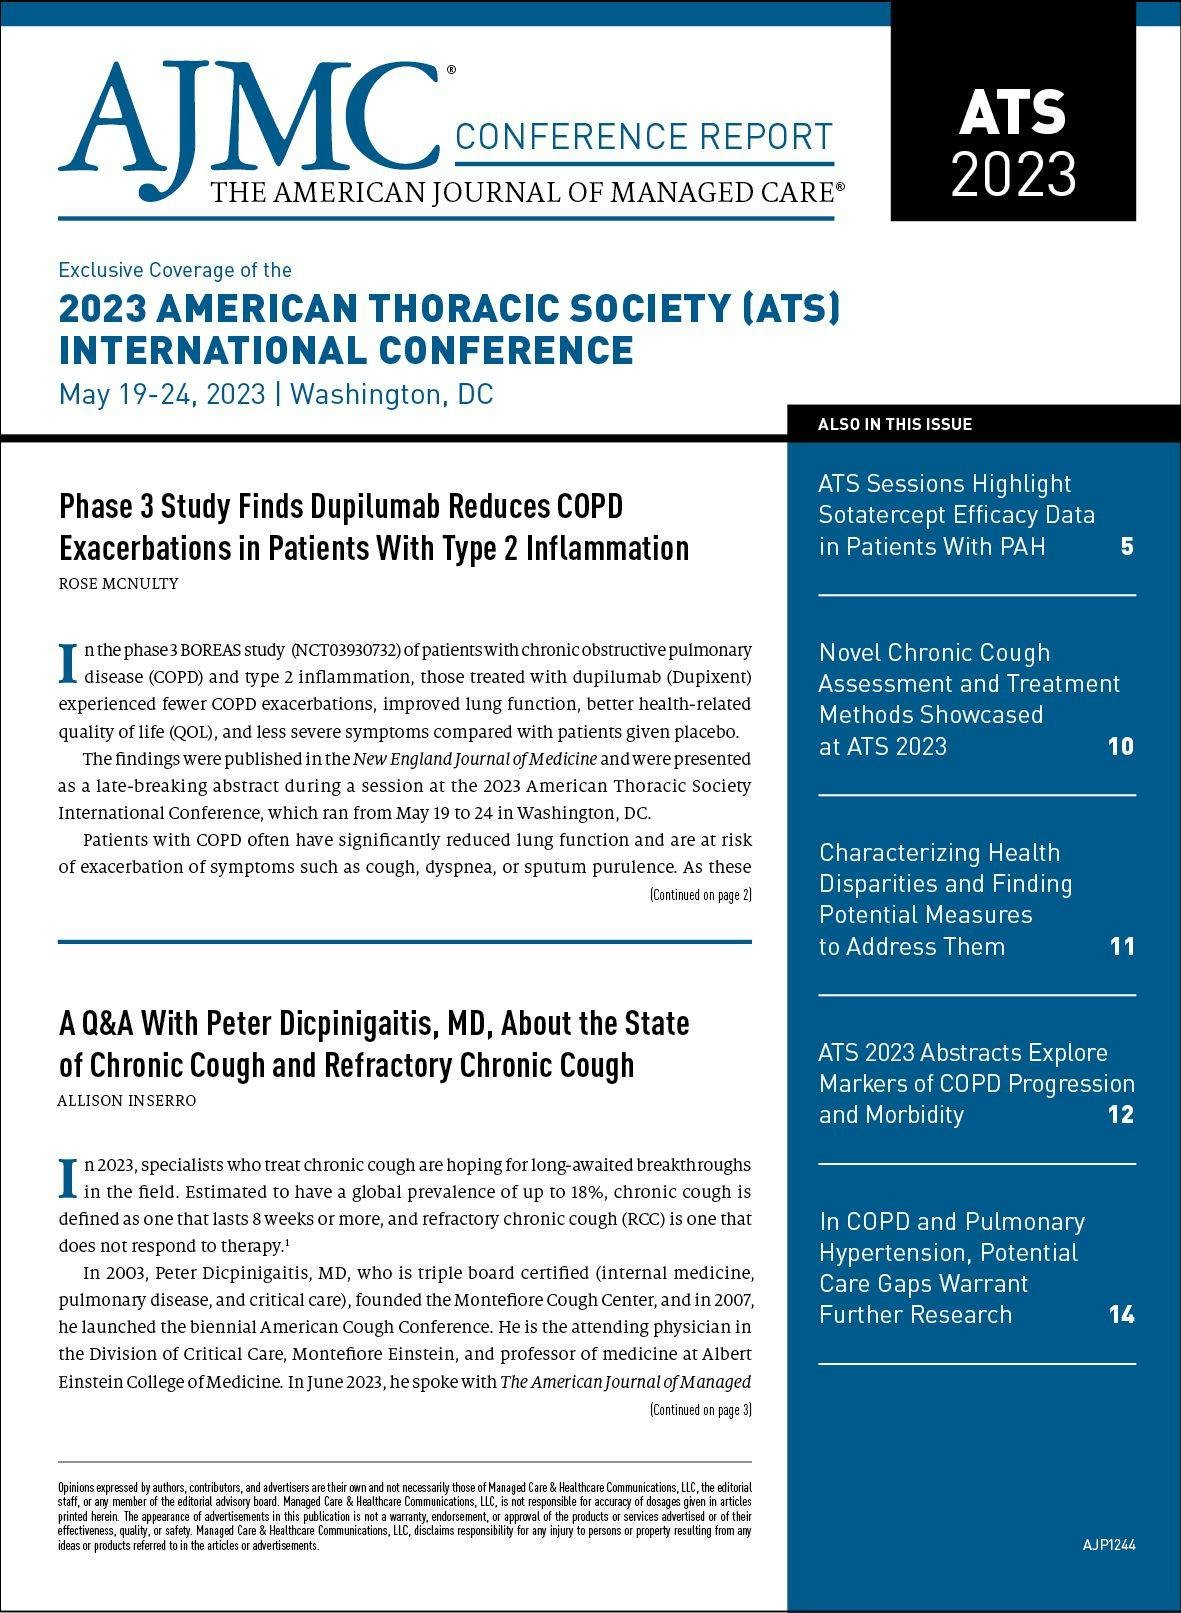 Exclusive Coverage of the 2023 American Thoracic Society (ATS) International Conference